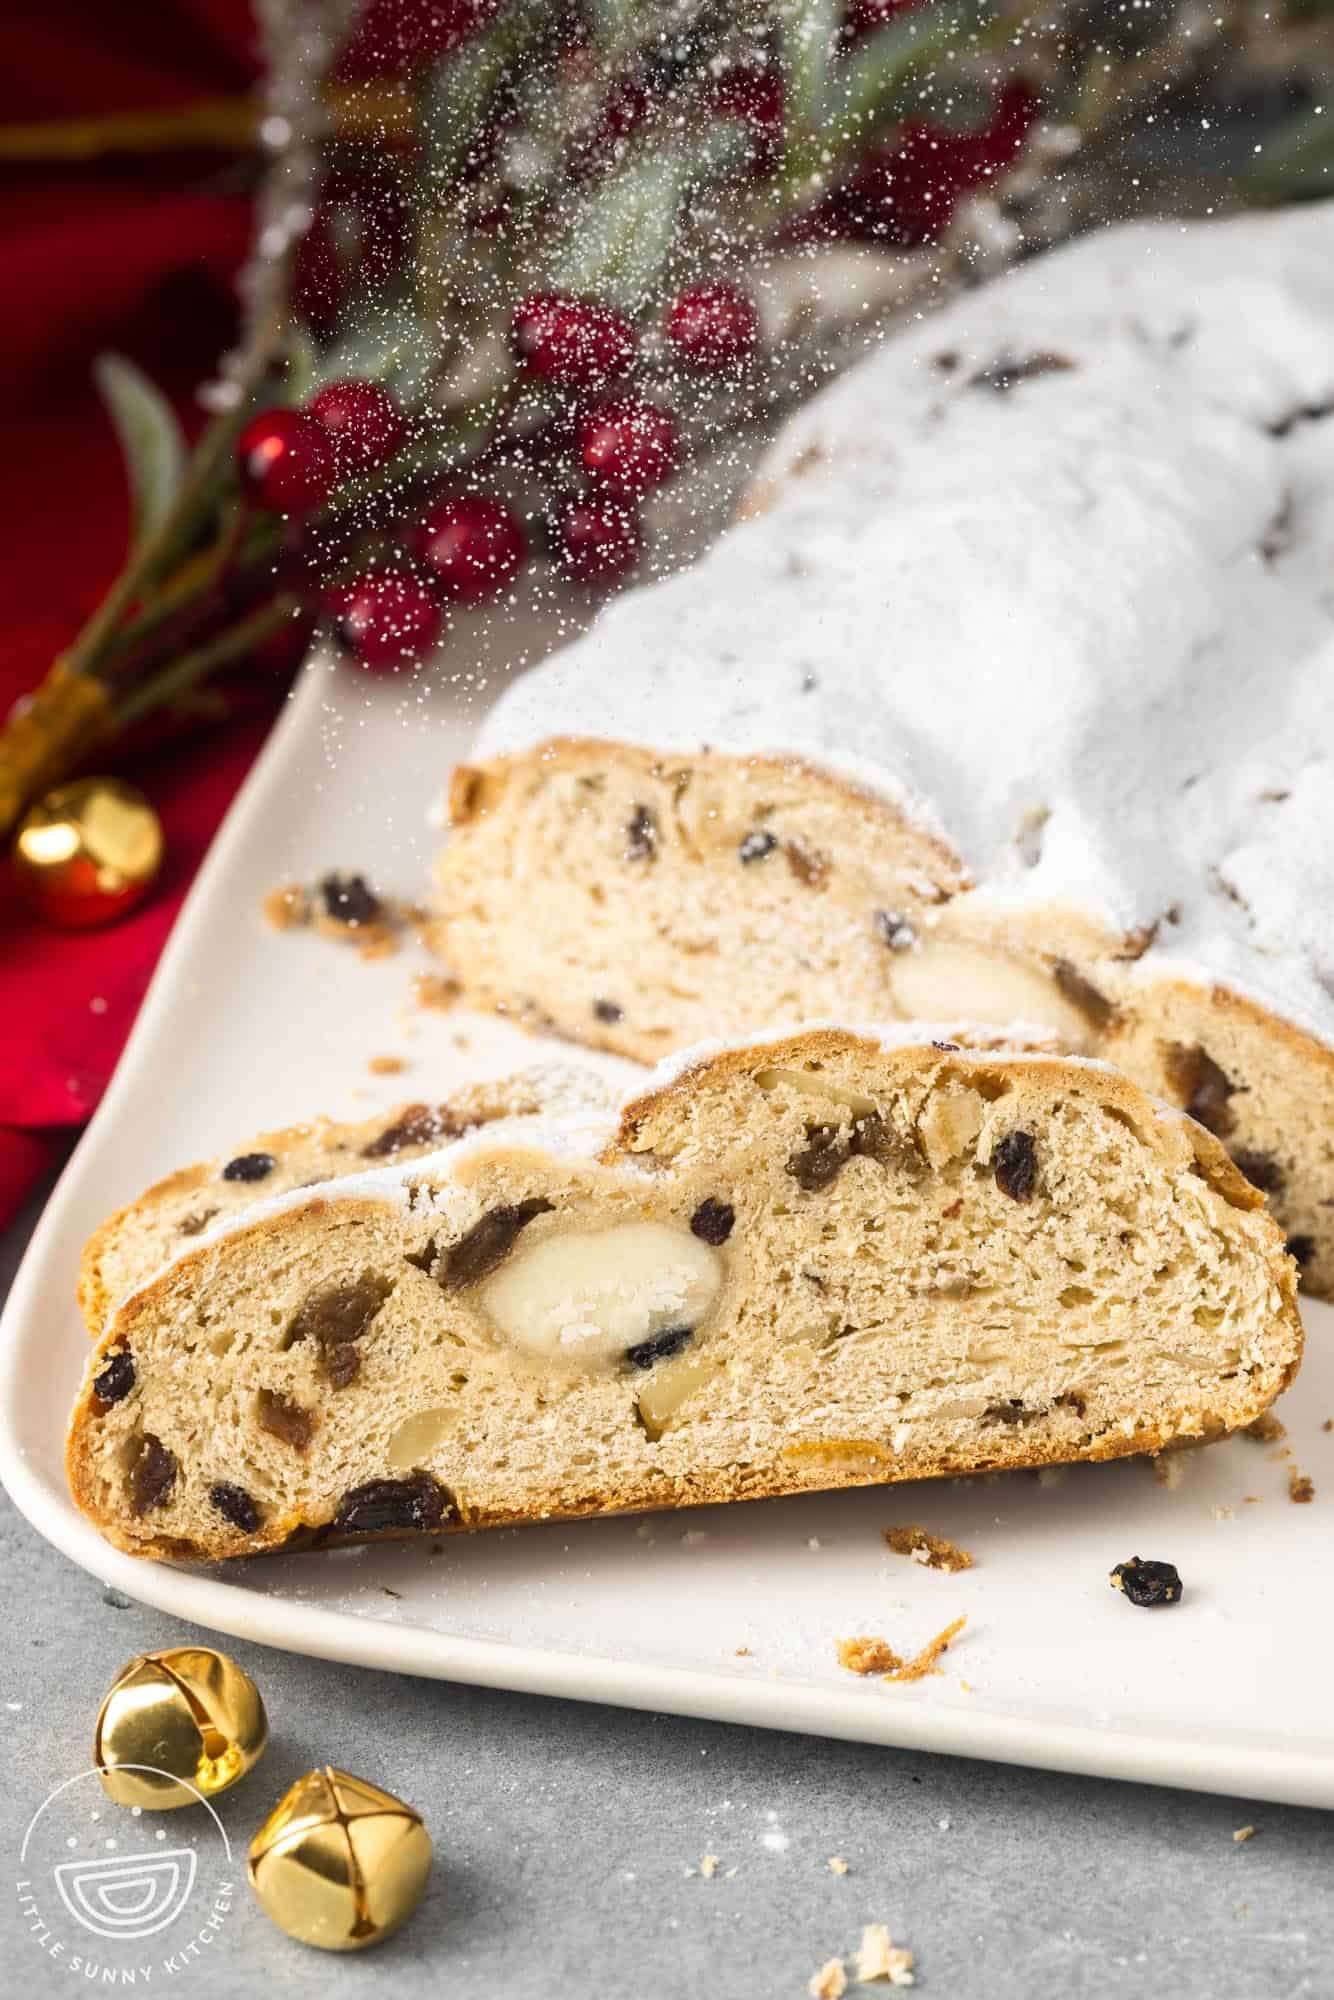 sliced stollen on a square plate showing the ribbon of marzipan in the center as well as raisins and candied peel.